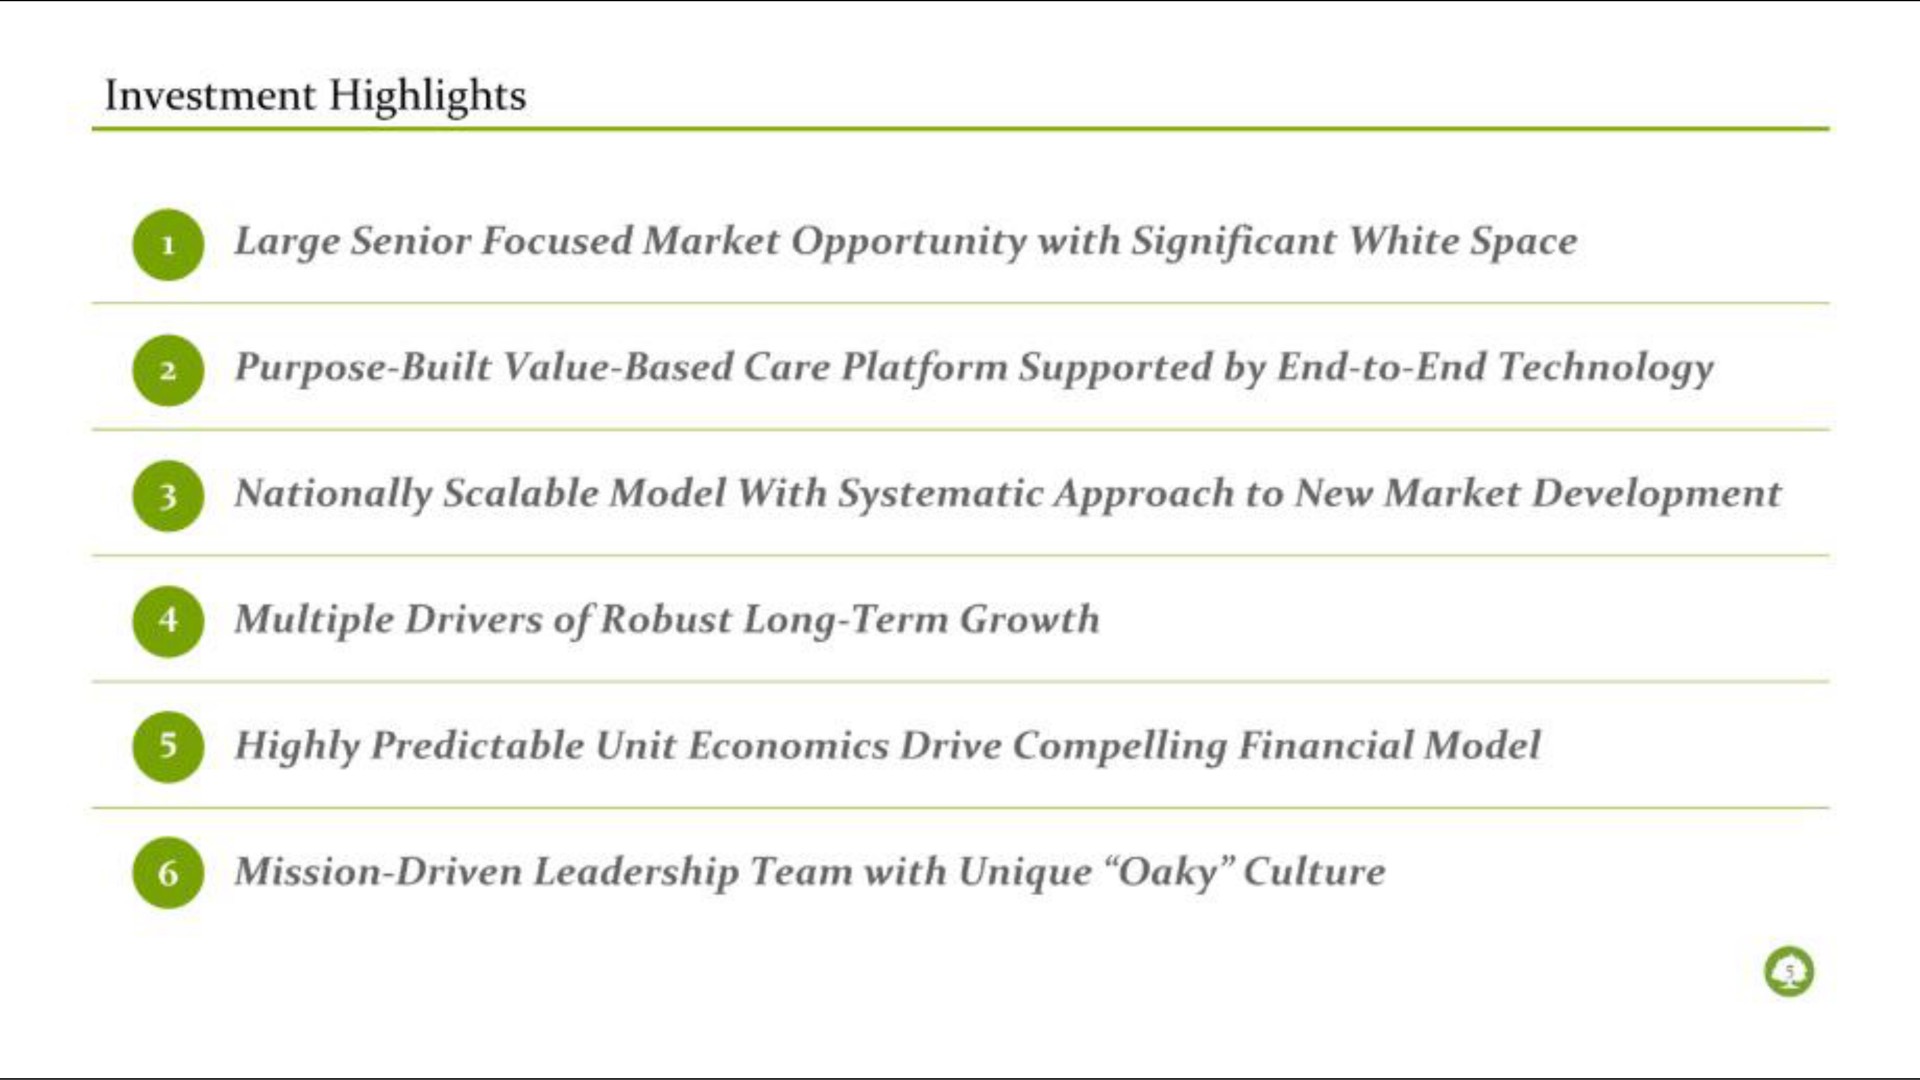 investment highlights large senior focused market opportunity with significant white space purpose built value based care platform supported by end to end technology nationally scalable model with systematic approach to new market development multiple drivers of robust long term growth highly predictable unit economics drive compelling financial model mission driven leadership team with unique oaky culture | Oak Street Health